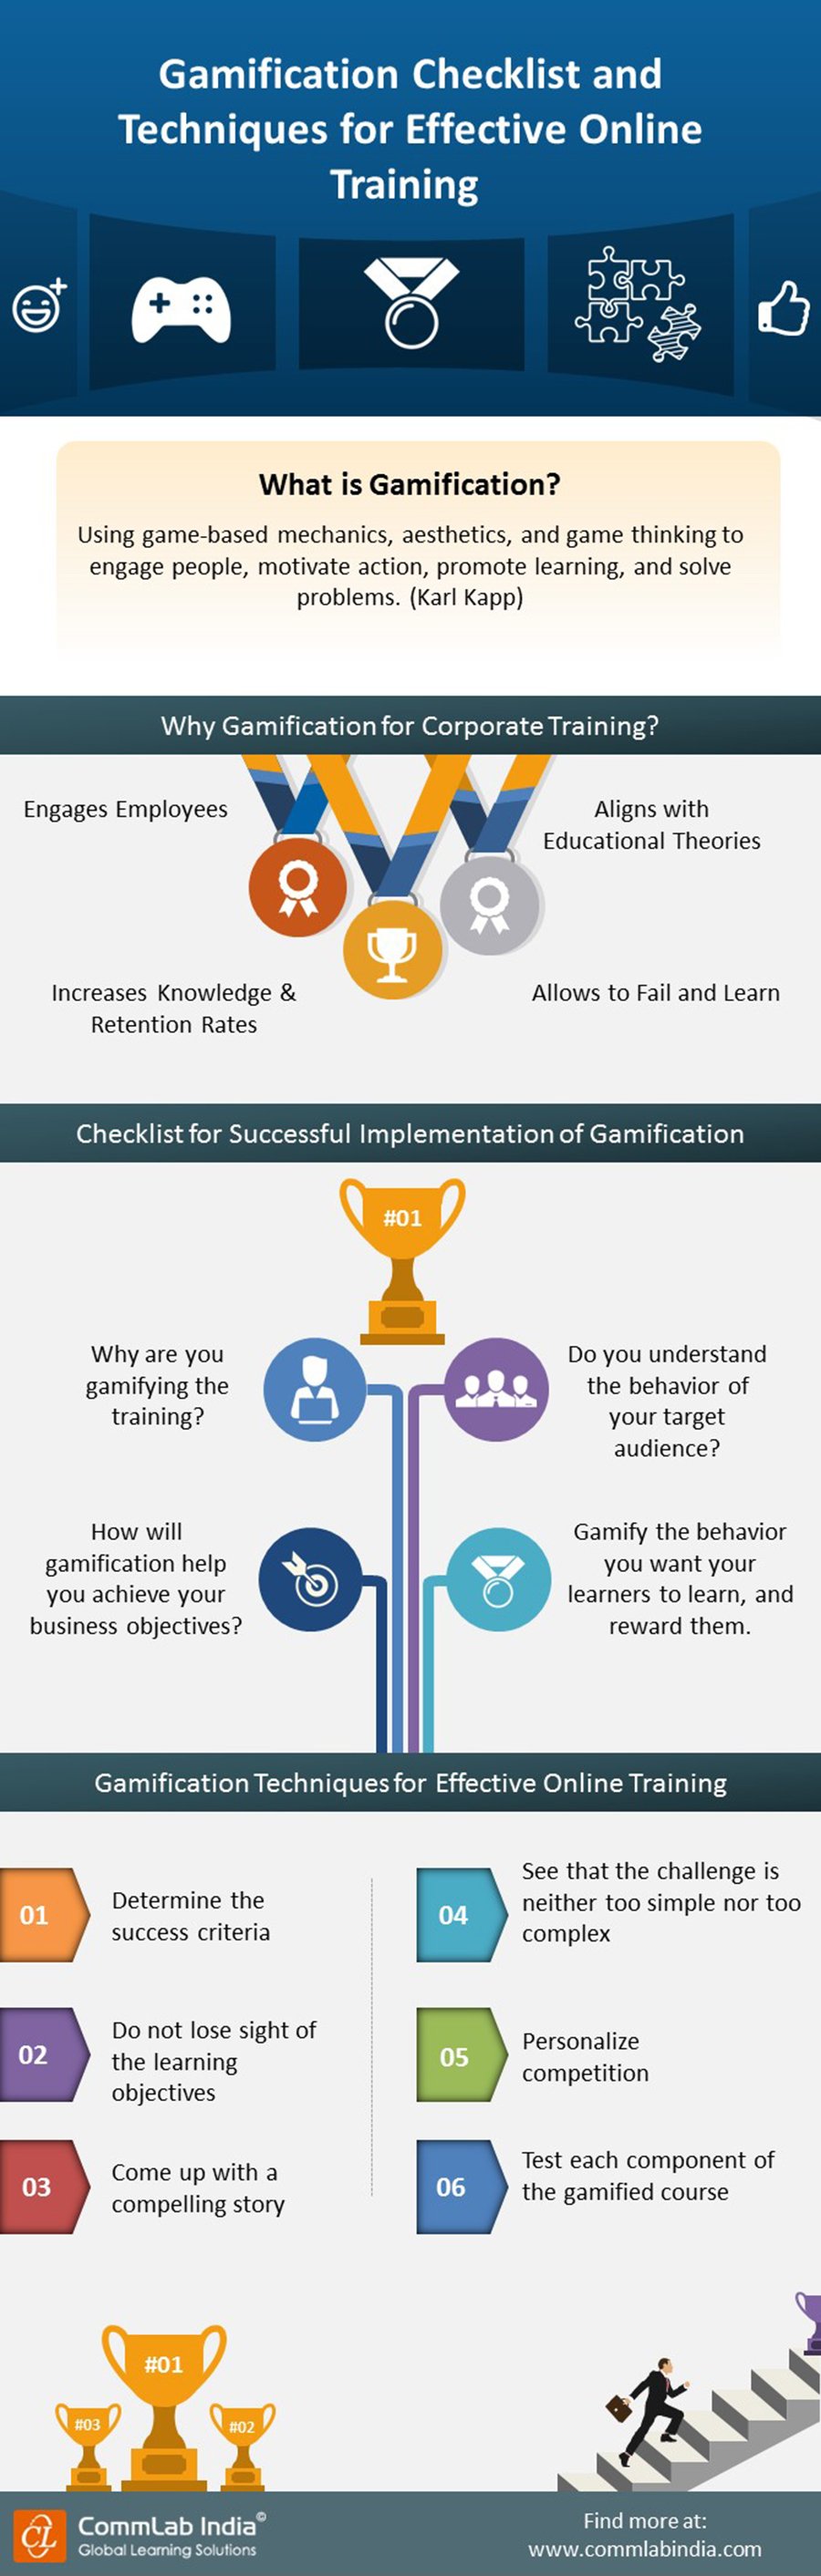 Gamification Checklist and Techniques for Effective Online Training [Infographic] 